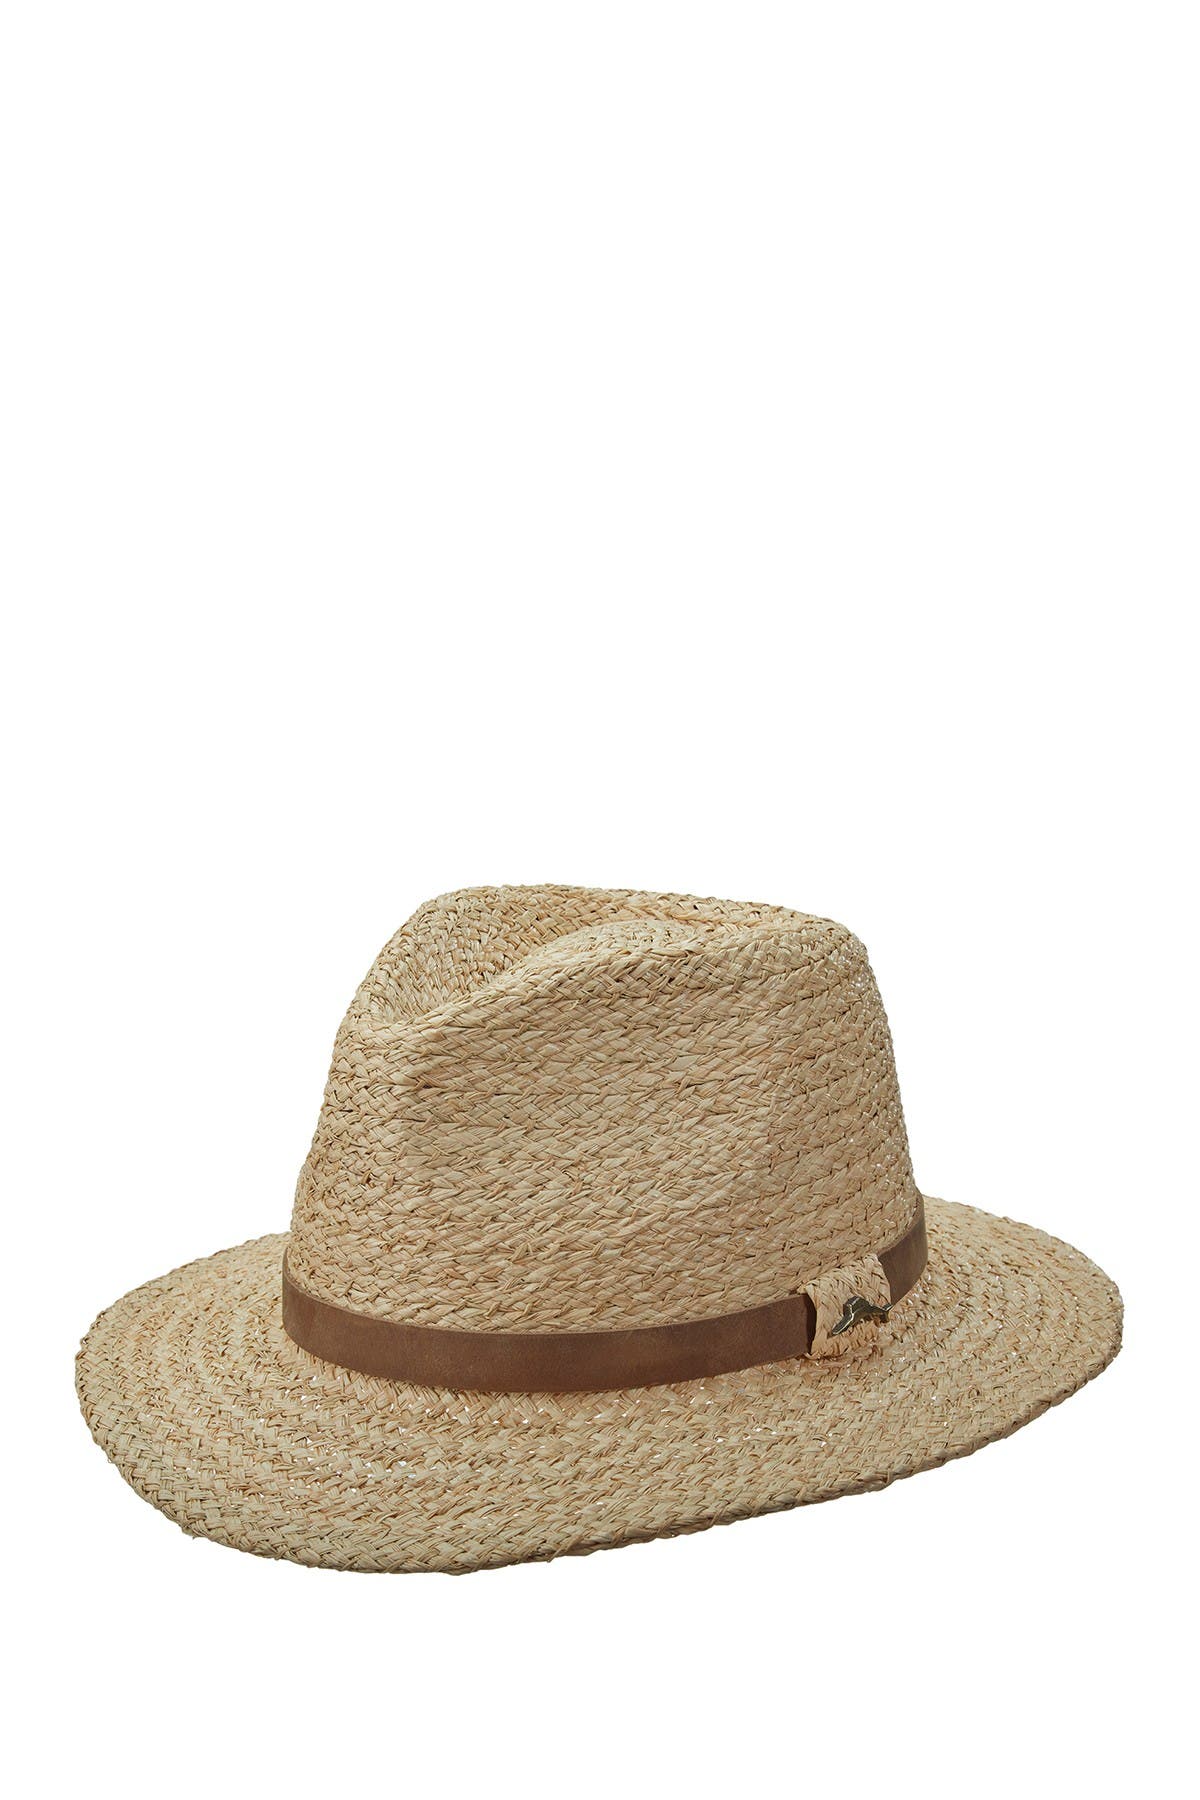 Tommy Bahama Hats for Women | Nordstrom 